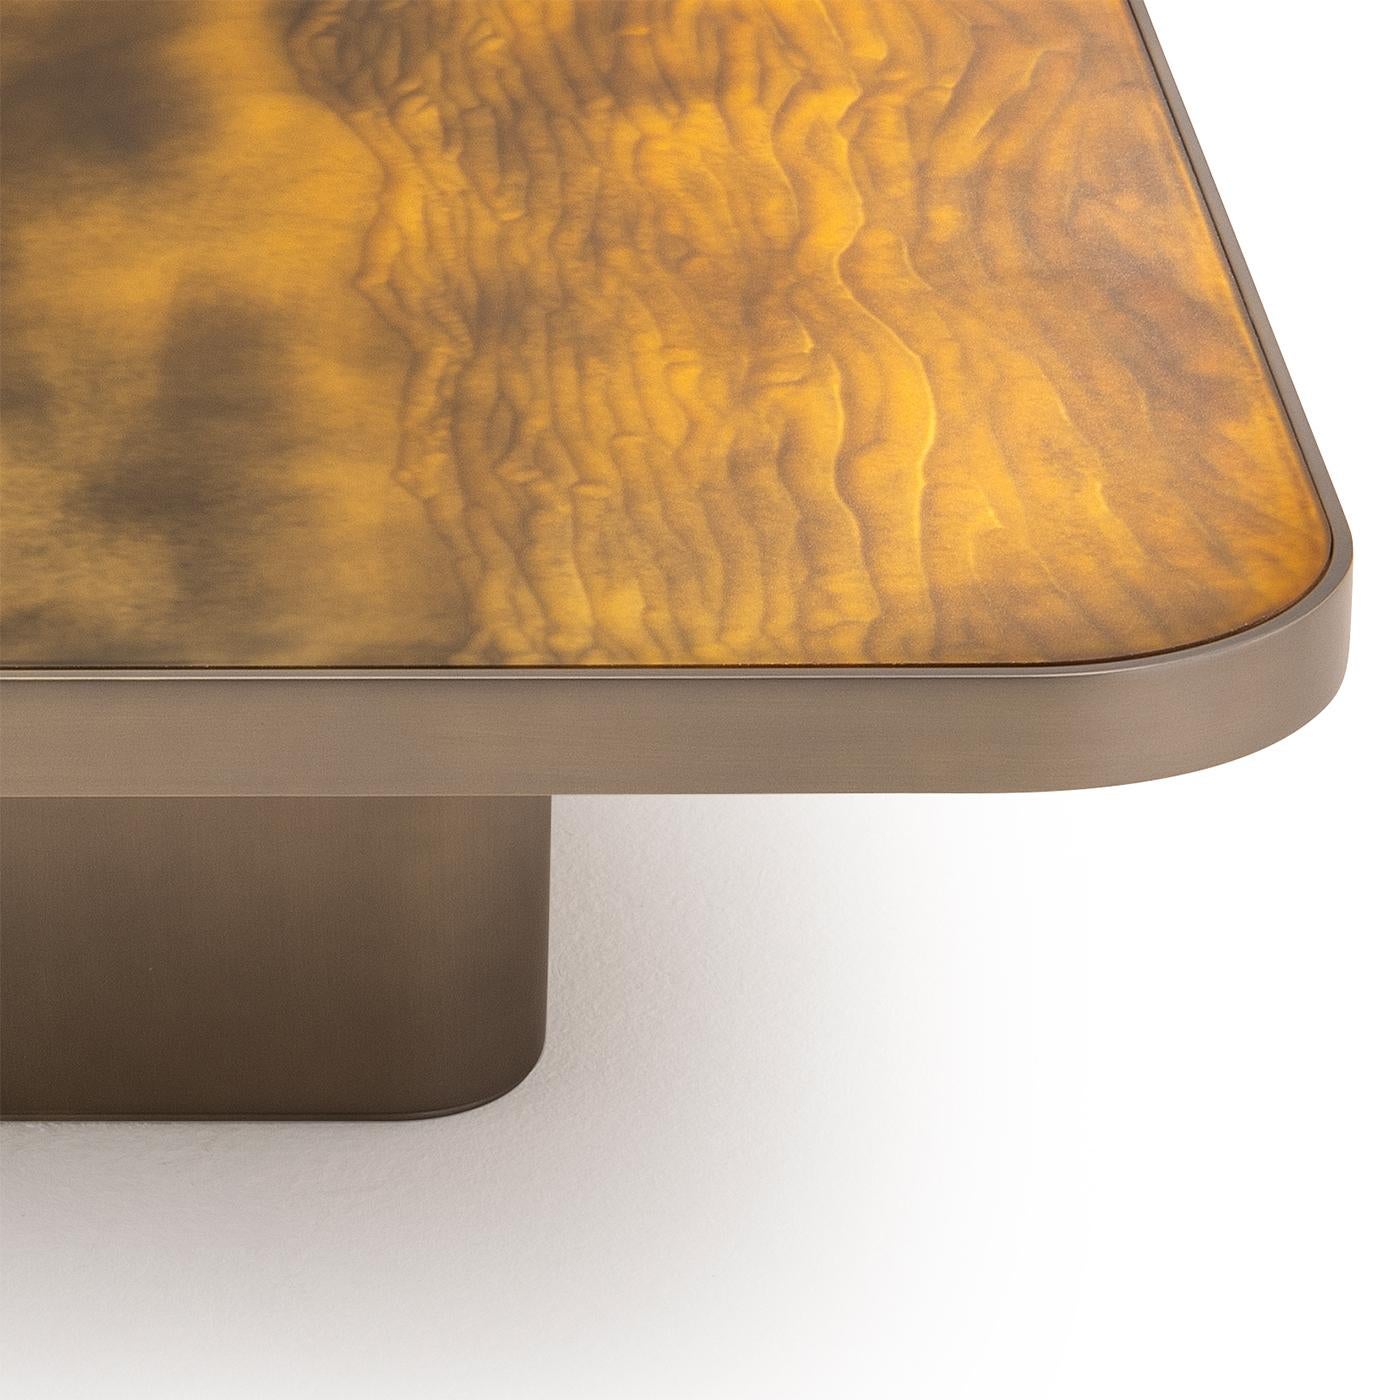 Presenting a coffee table of exquisite design, showcasing a Gargano-finished etched glass top. The base and outer edges are meticulously crafted from wood, lacquered to achieve a stunning brass color. This combination of materials results in a